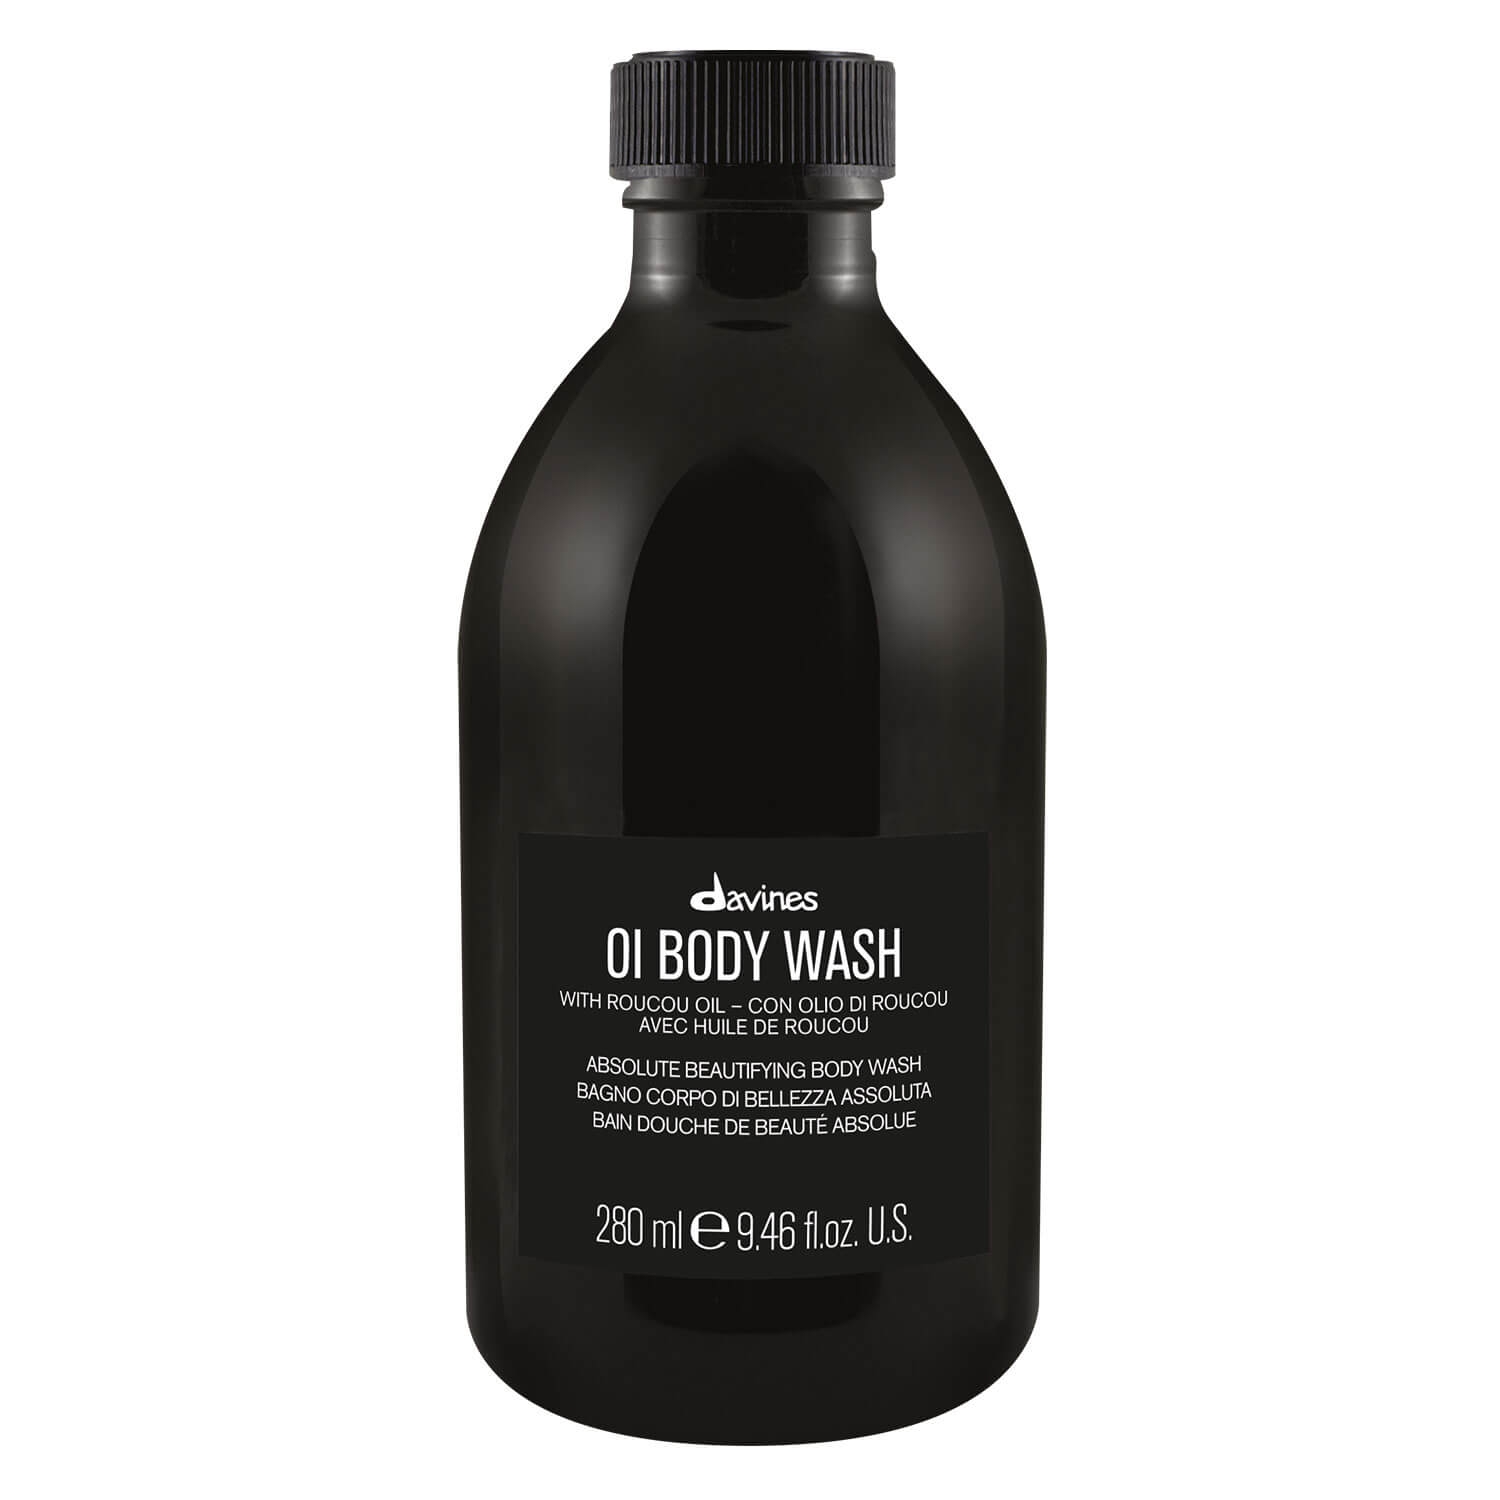 Product image from Oi - Body Wash